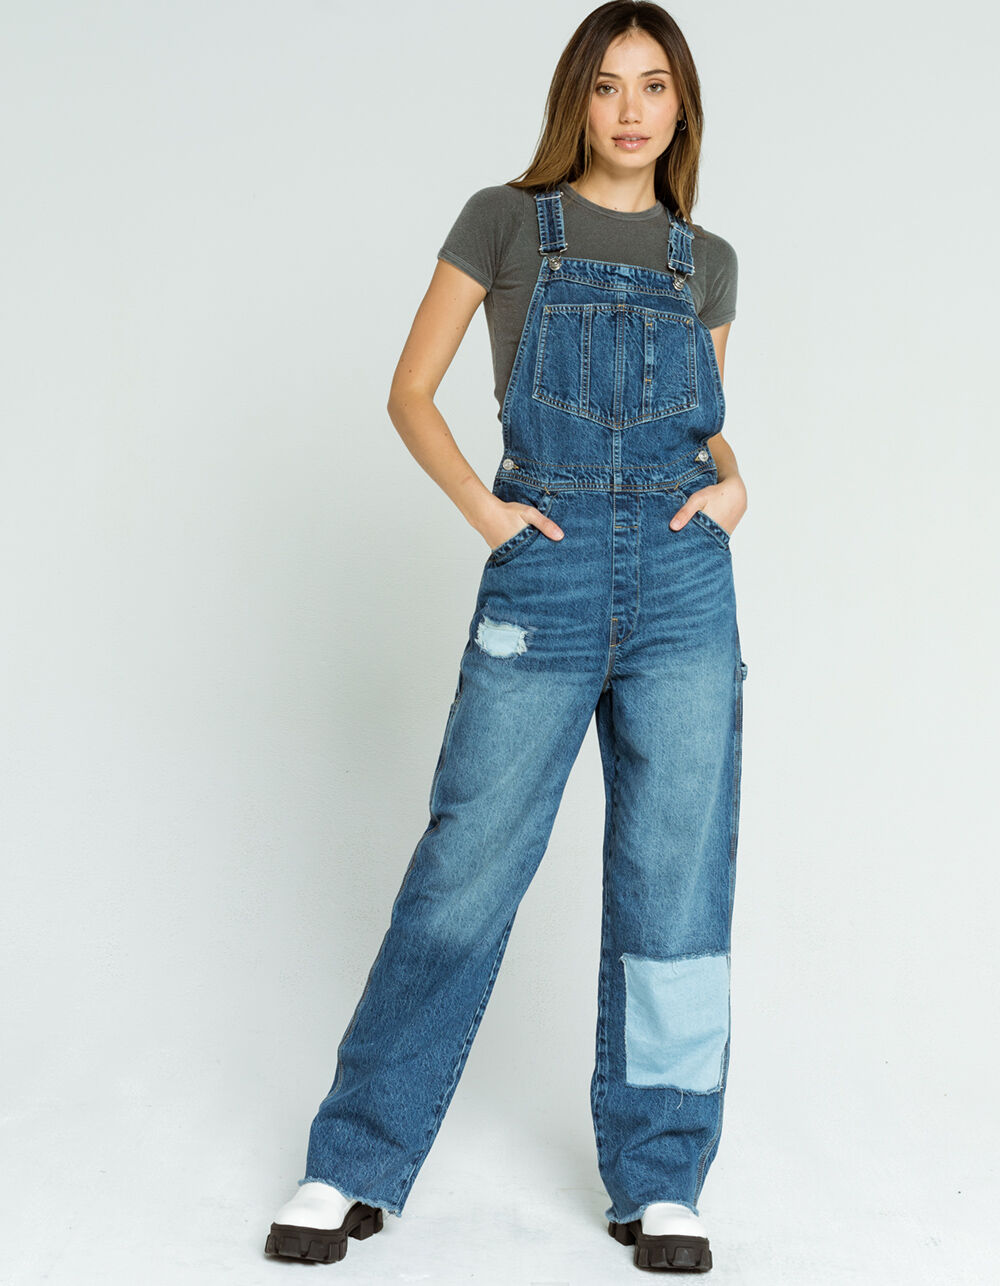 BDG Urban Outfitters Workwear Womens Dungarees - MEDIUM WASH | Tillys